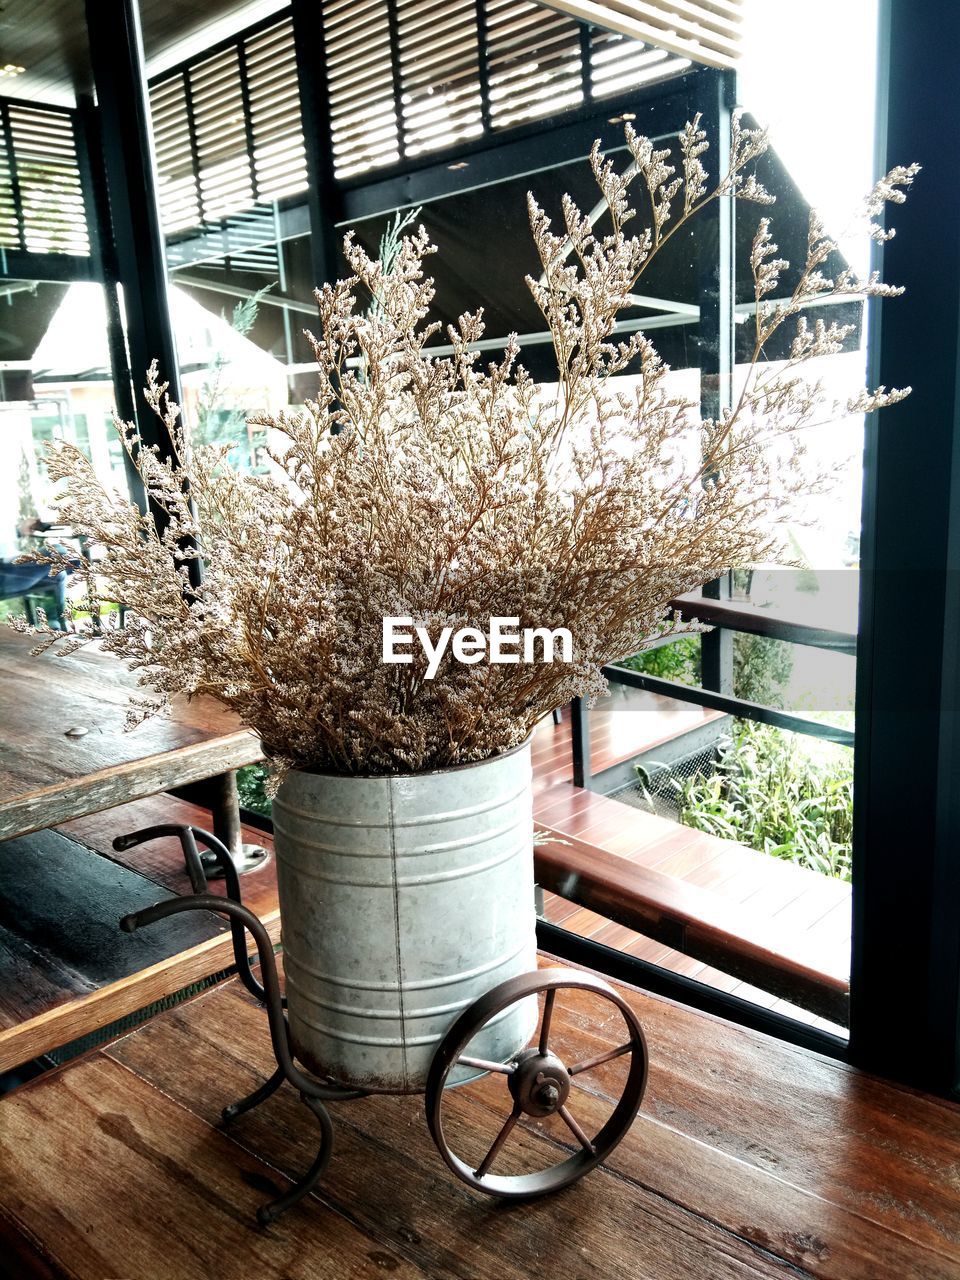 CLOSE-UP OF POTTED PLANT ON TABLE BY WINDOW